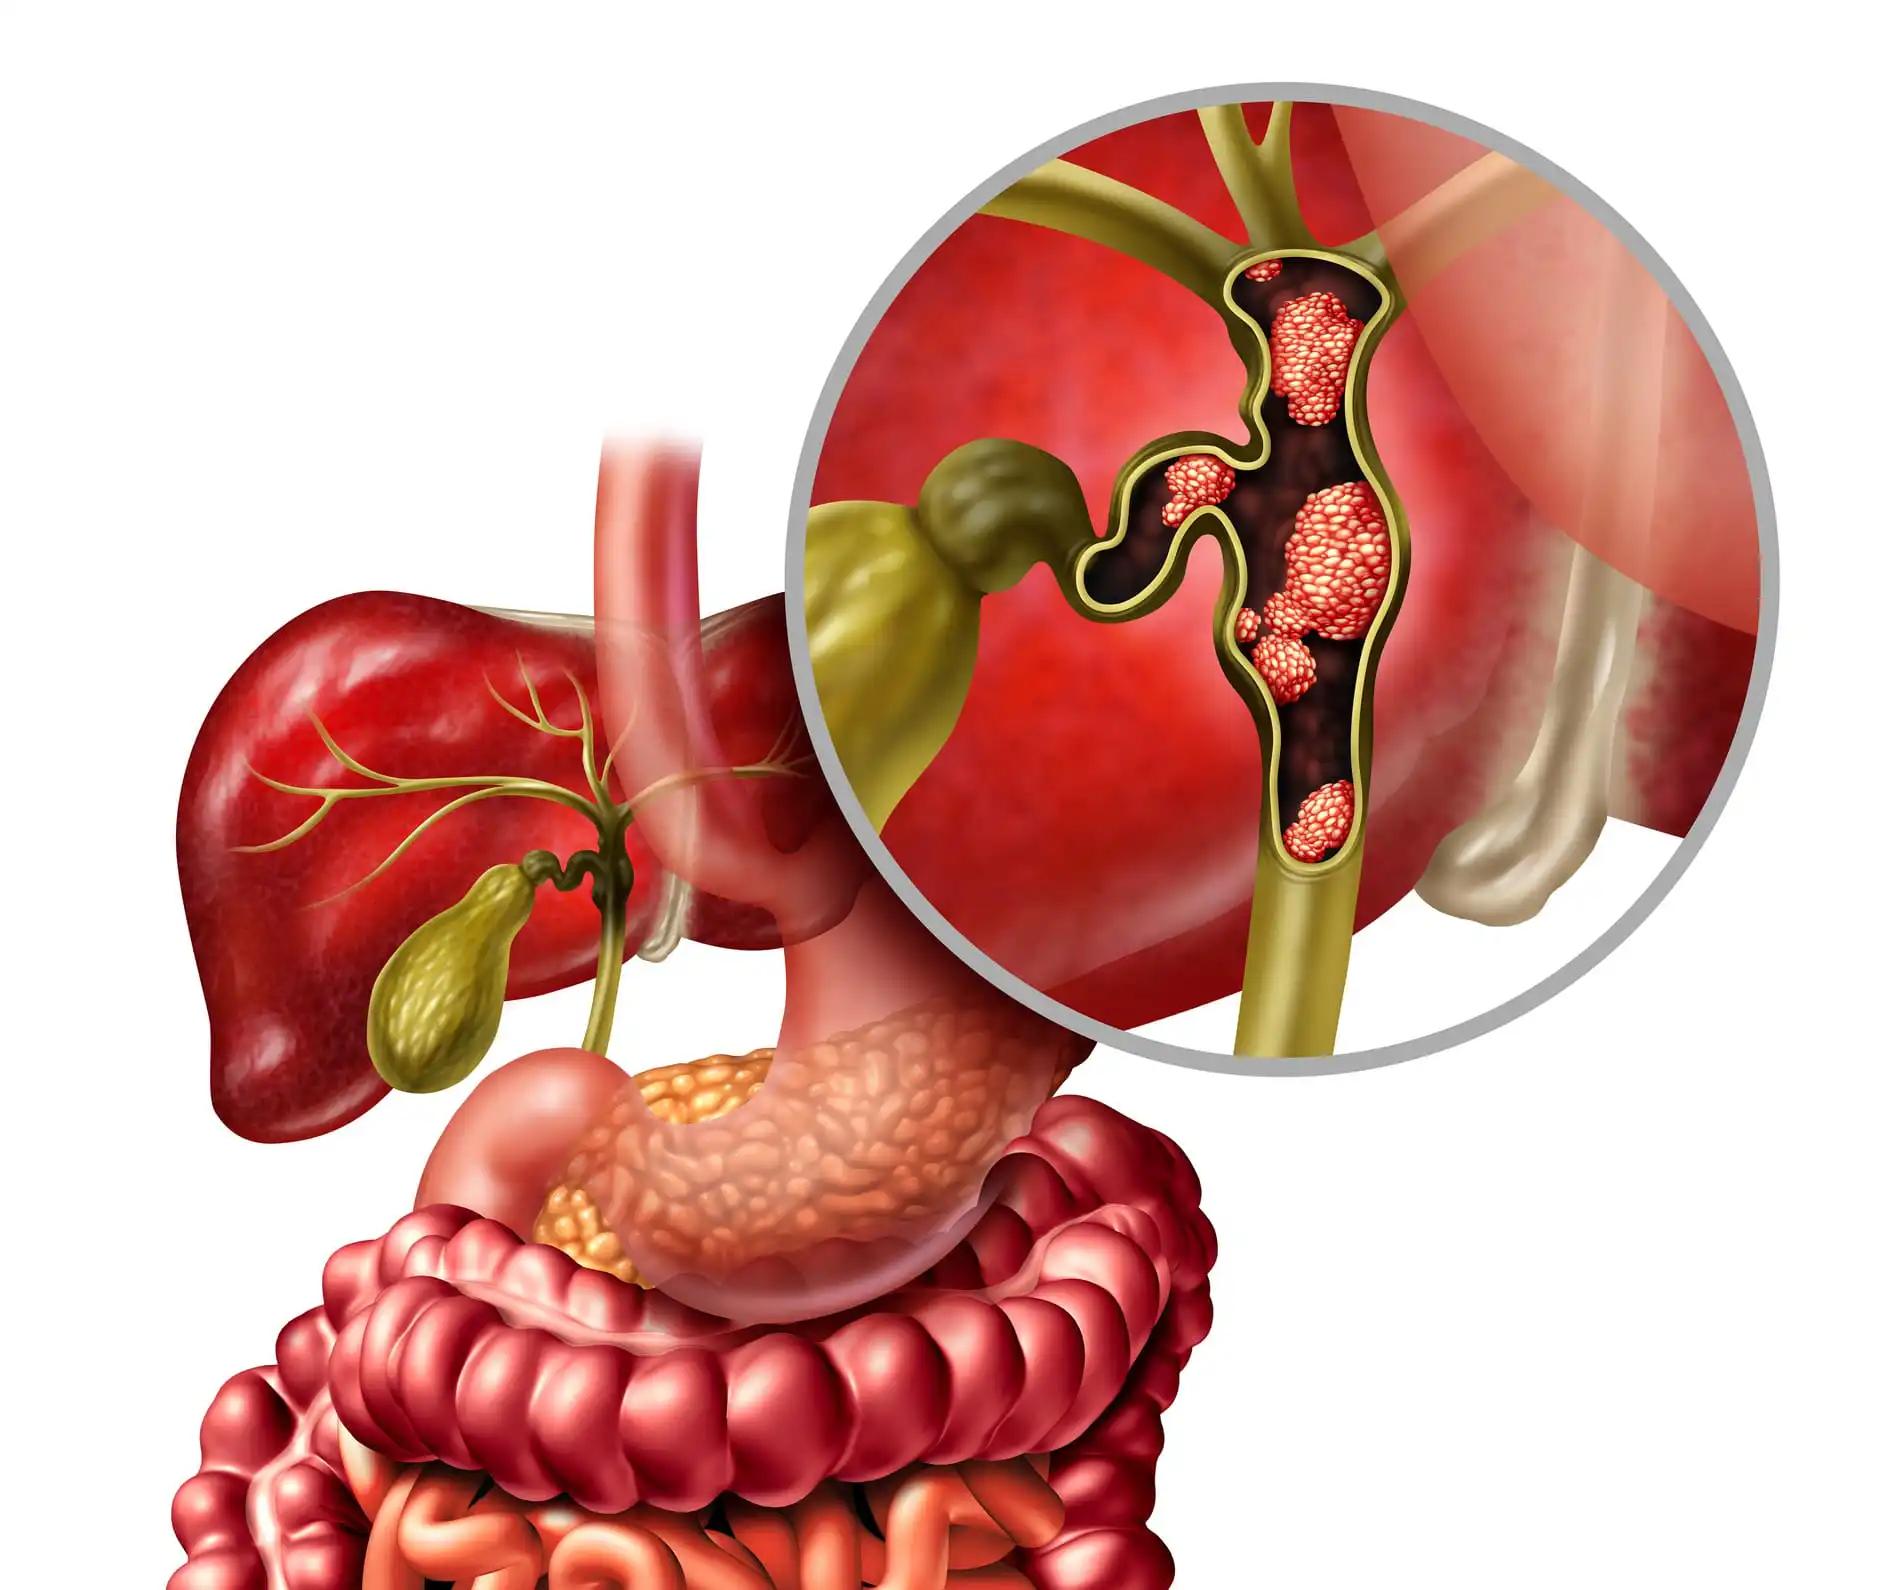 Bile Duct Cancer with Gallbladder and Liver